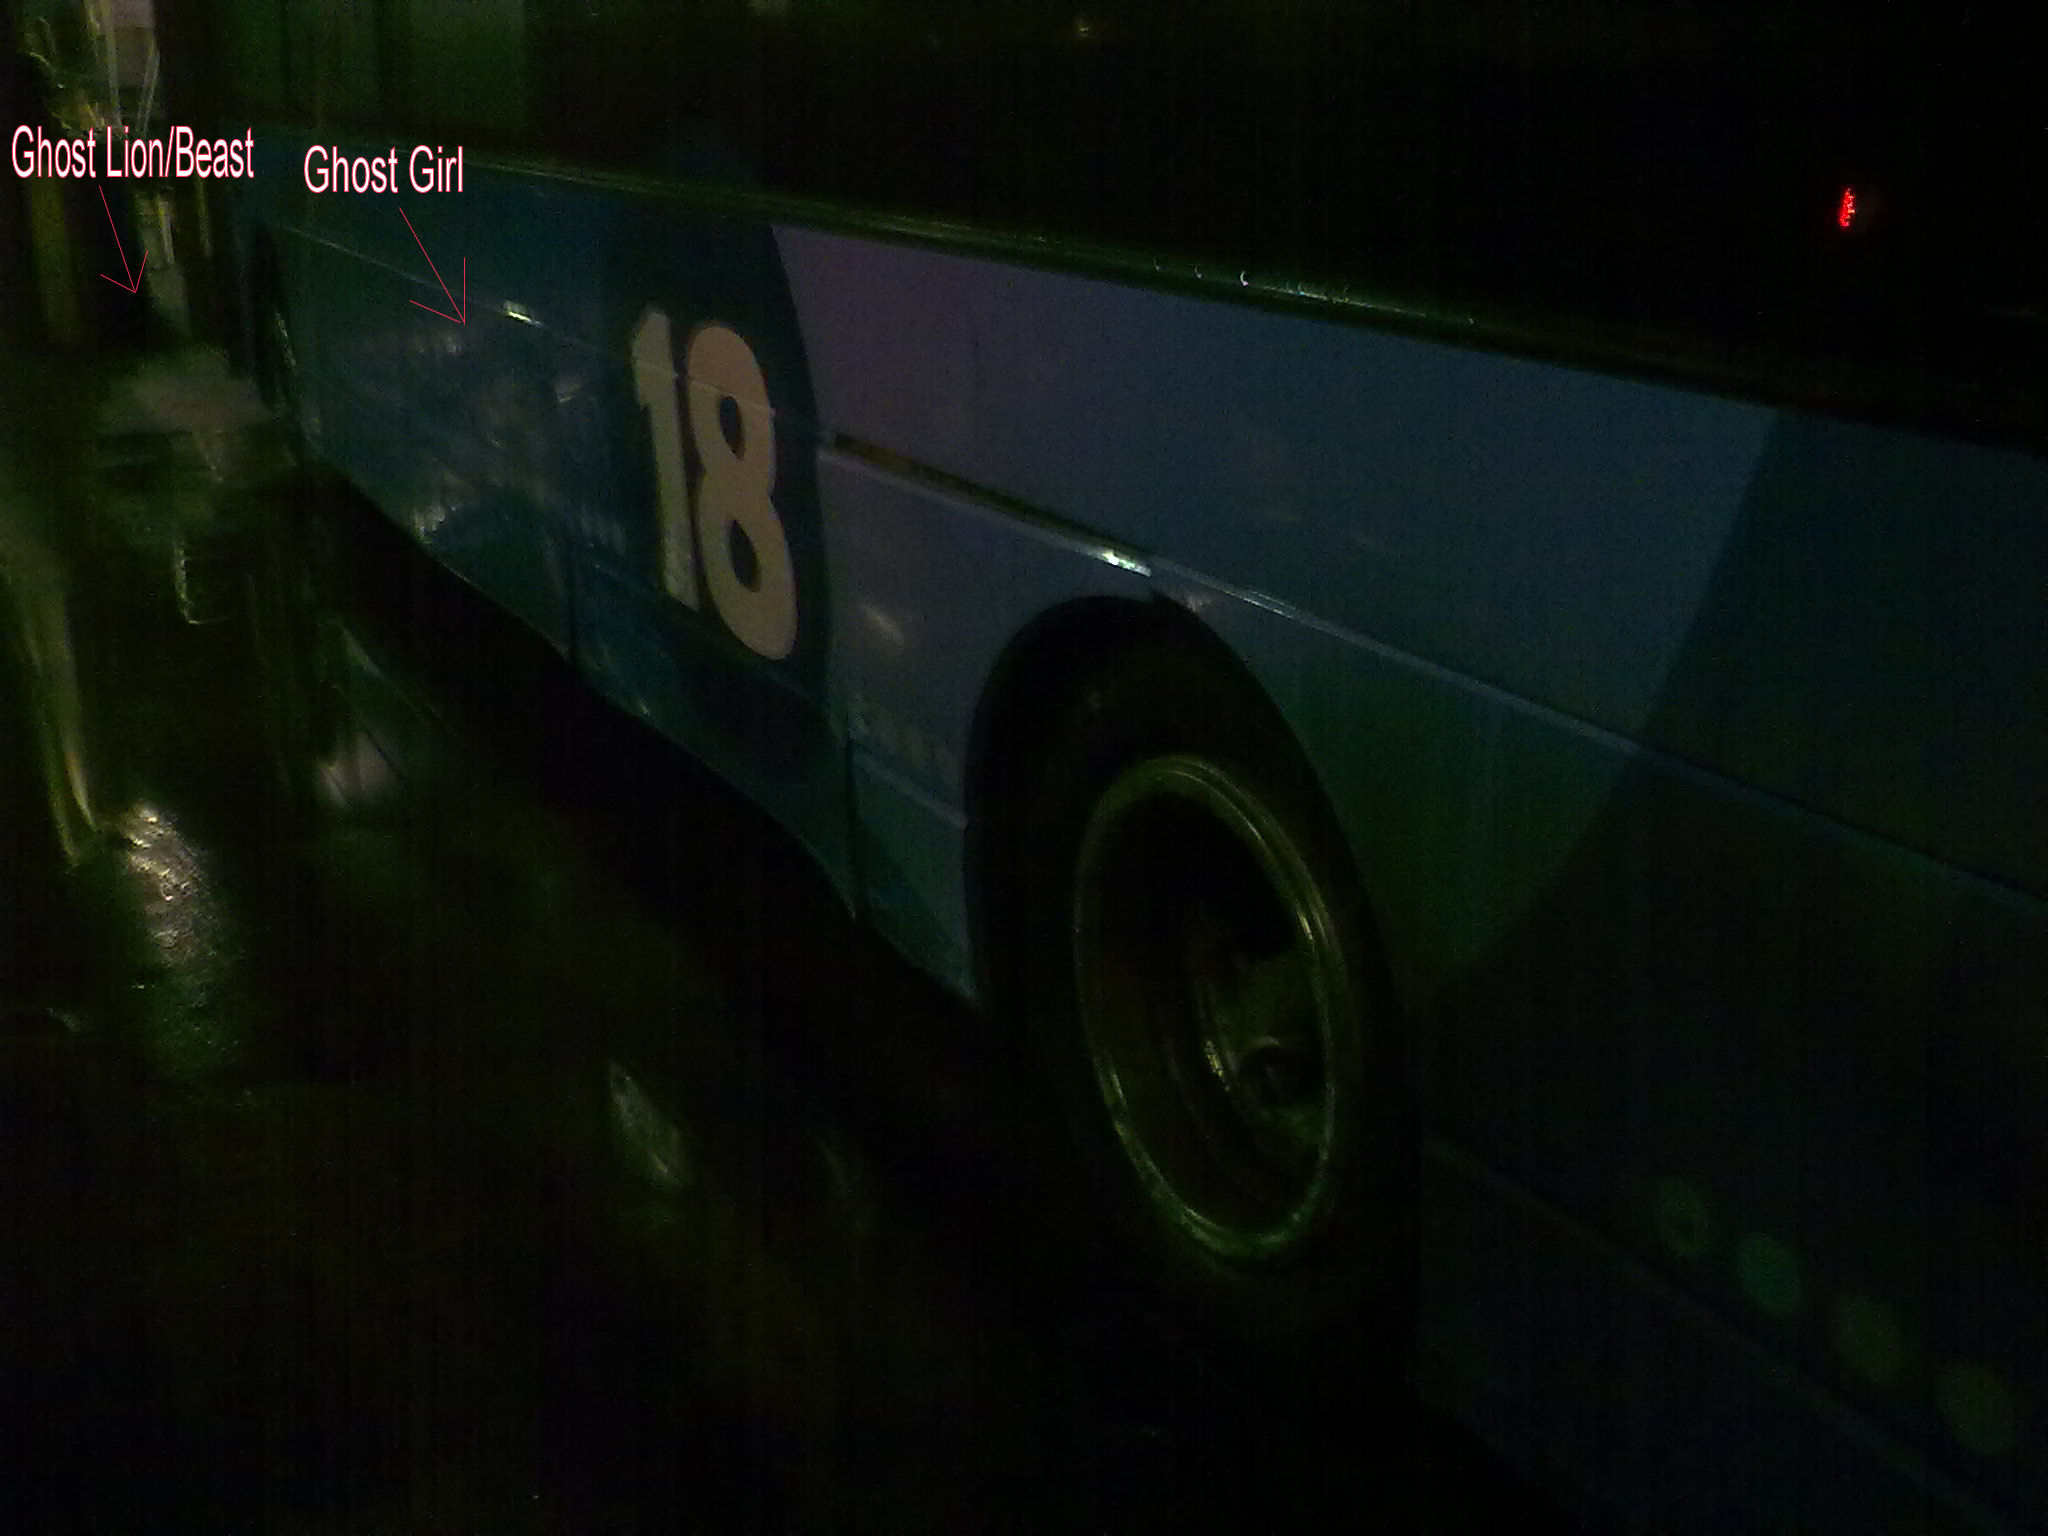 A friend of mine crashed his bus and took a picture of it back at the depo.......theres some weird stuff in the picture take a look for ya self.